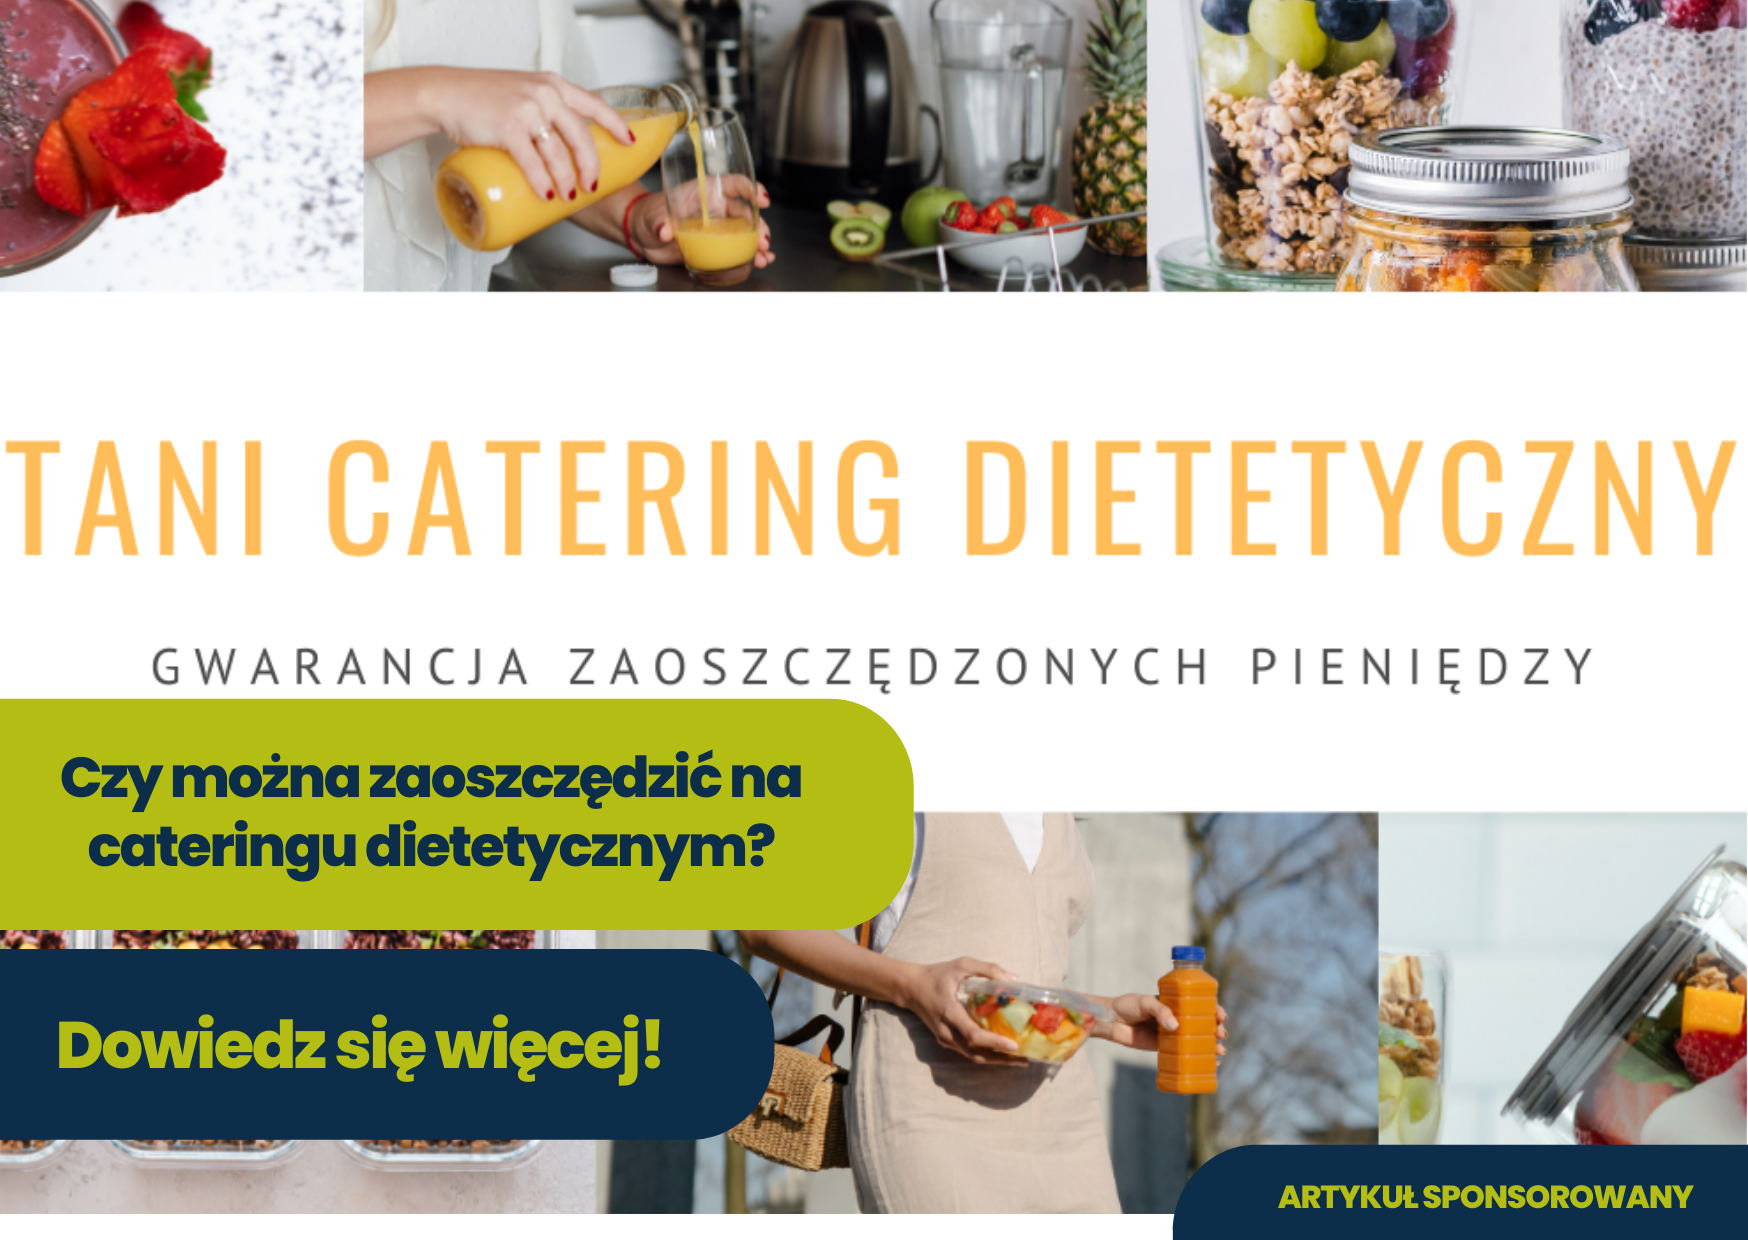 Zdrowy Catering